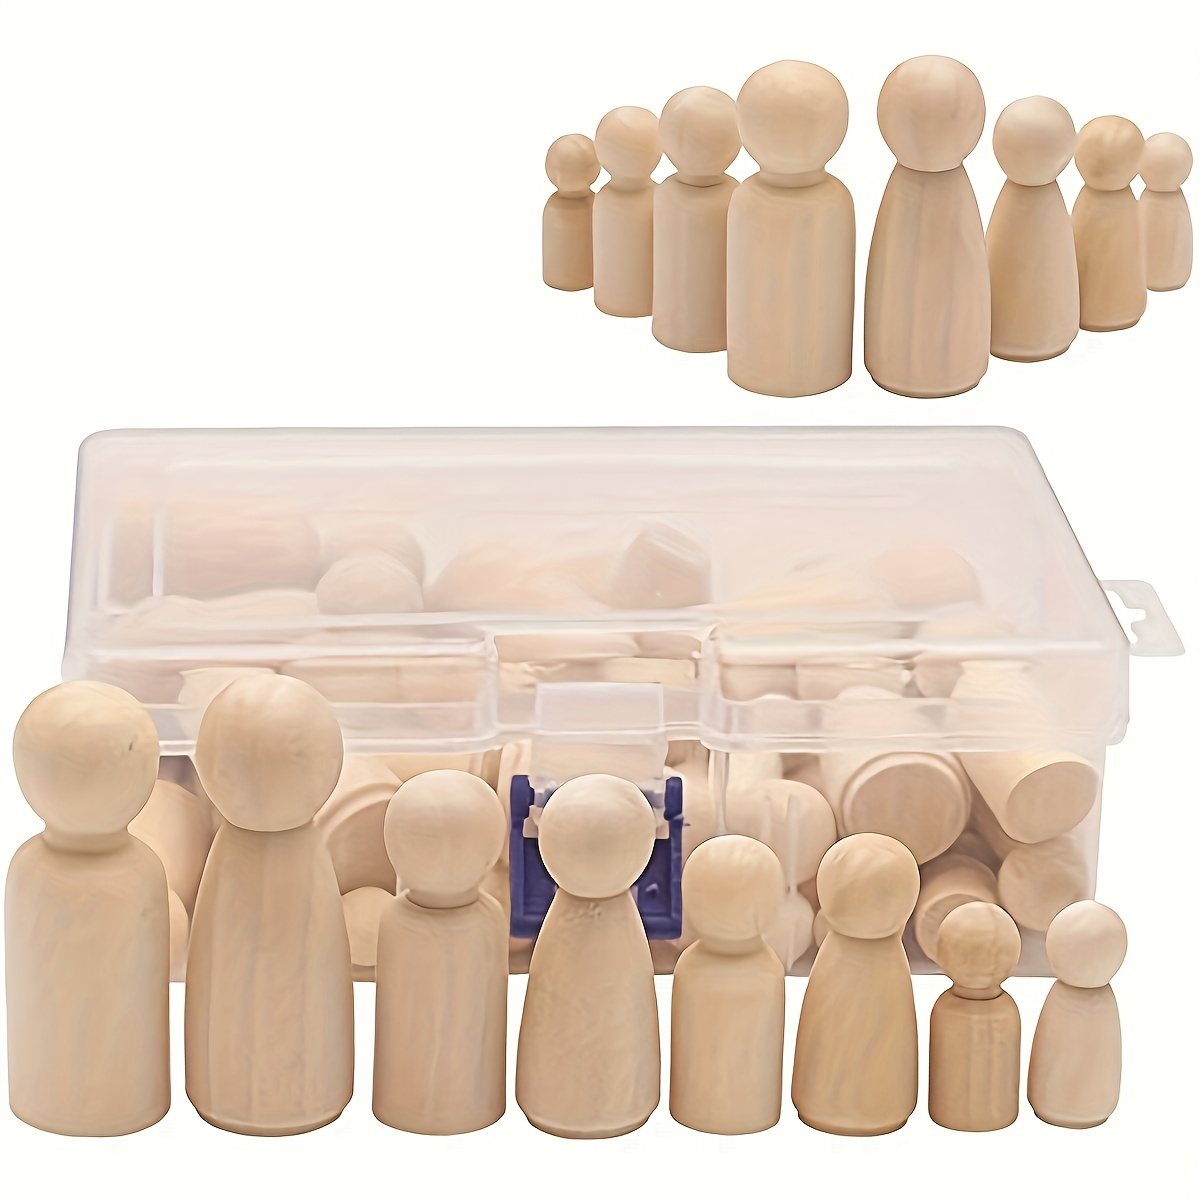 

50pcs Wooden Peg Dolls, Peg People, Doll Bodies, Wooden Figures, Decorative Peg Doll People For Diy Art Craft, Painting, Peg Game, Home Party Decor, Assorted Shapes And Sizes